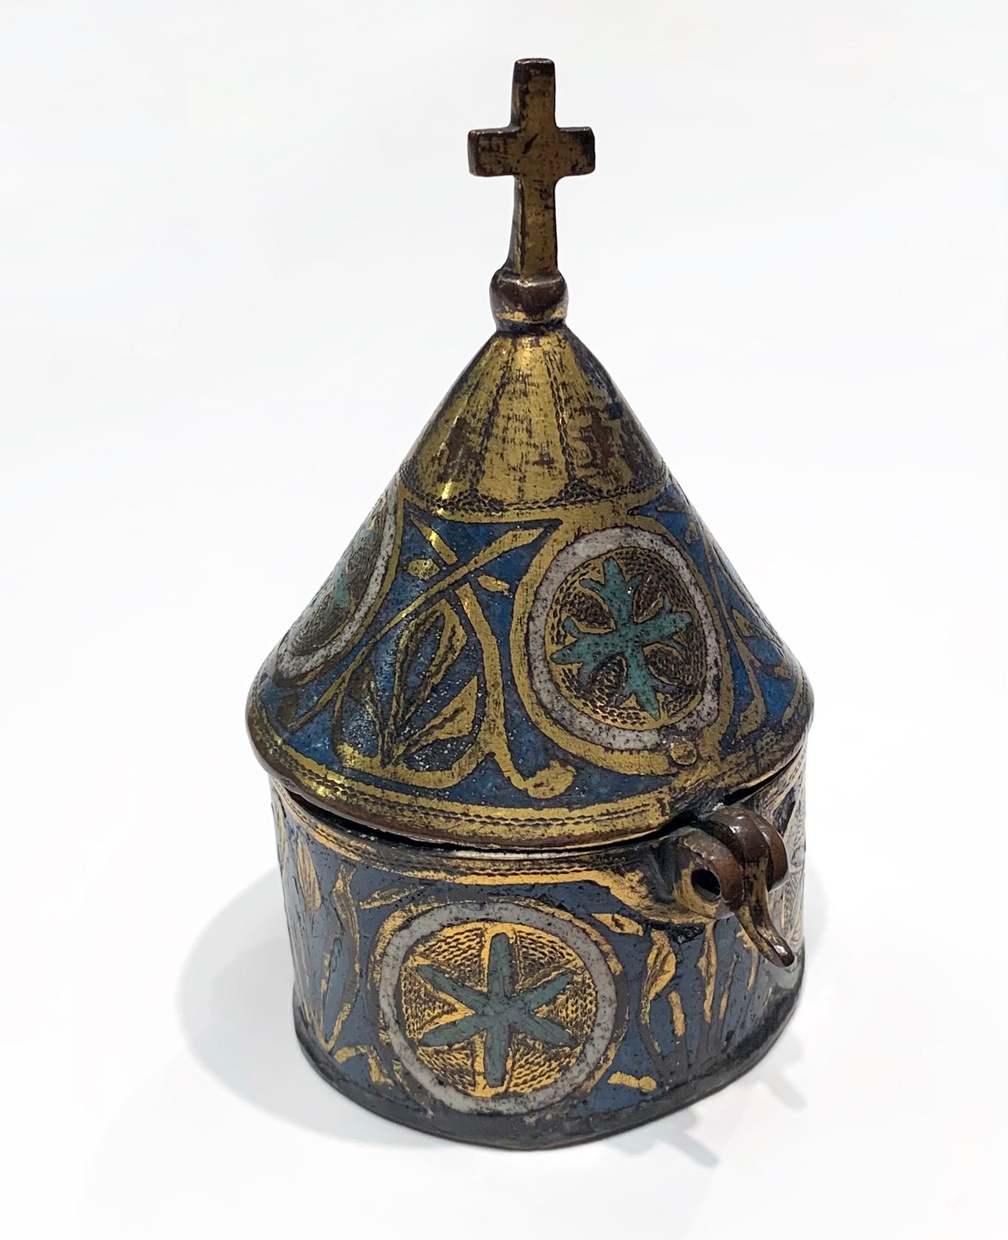 A small round container with blue and gold patterns and a gold cross at the top of a funnel-shaped lid.